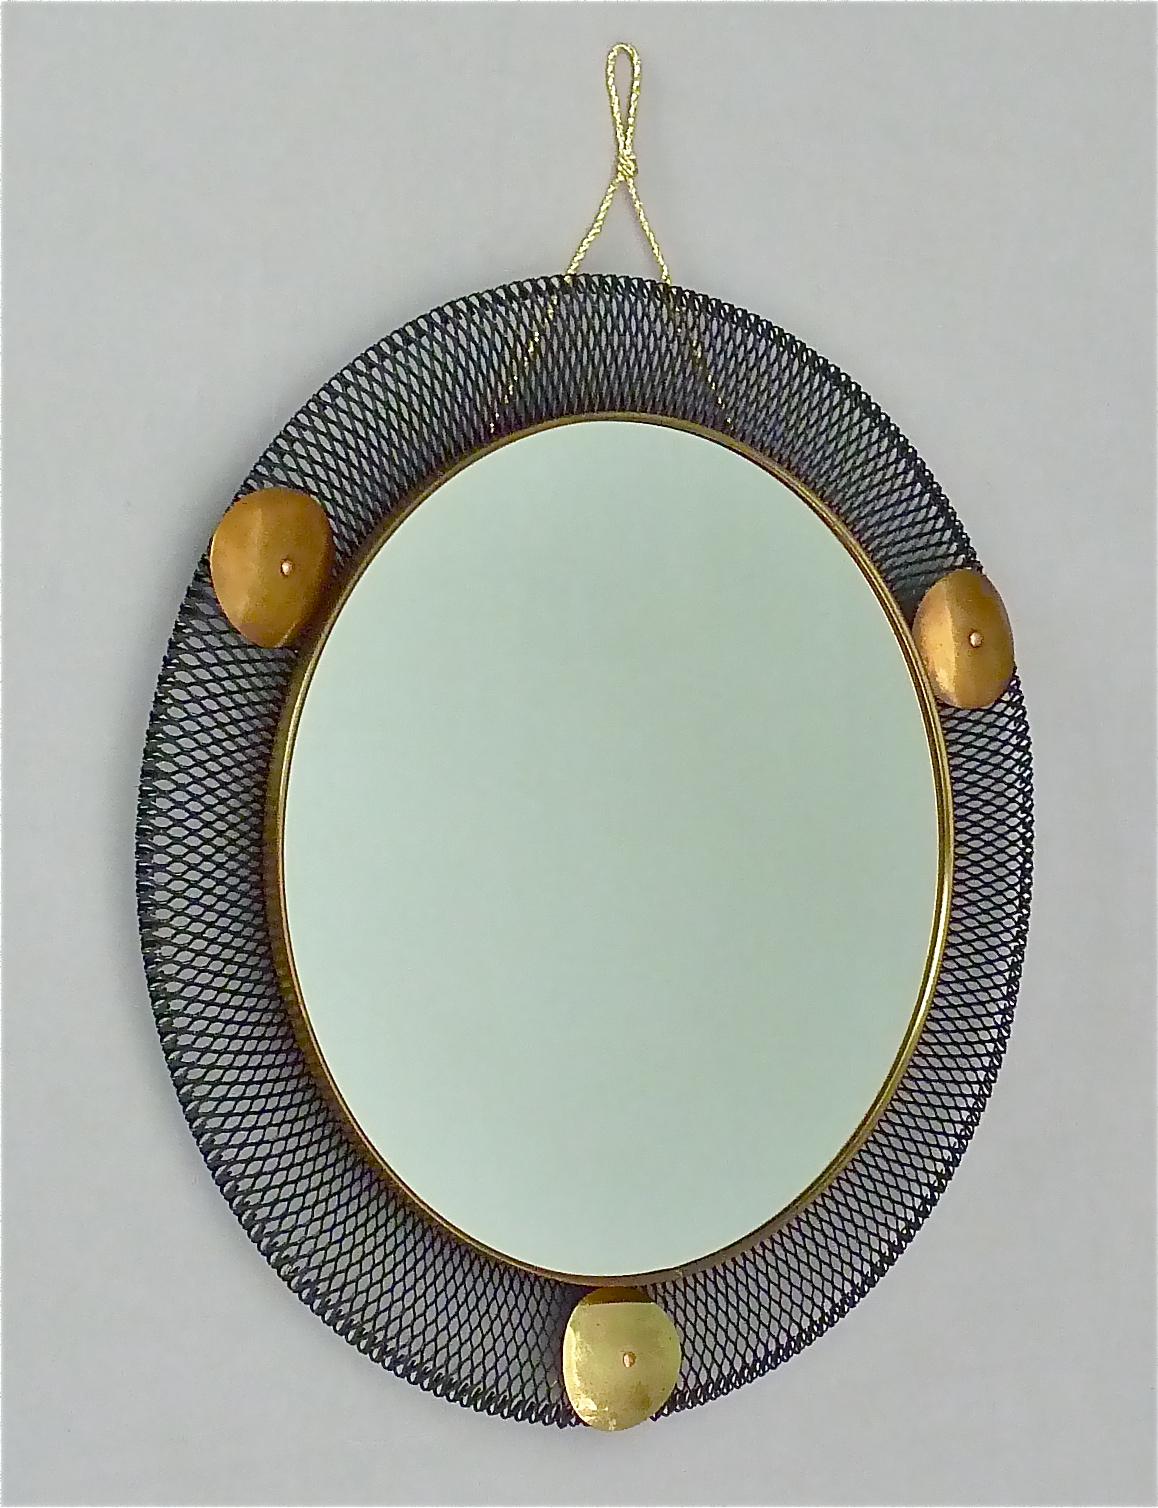 Round Black Midcentury Wall Mirror Brass Stretched Metal 1955 Mategot Biny Style For Sale 1